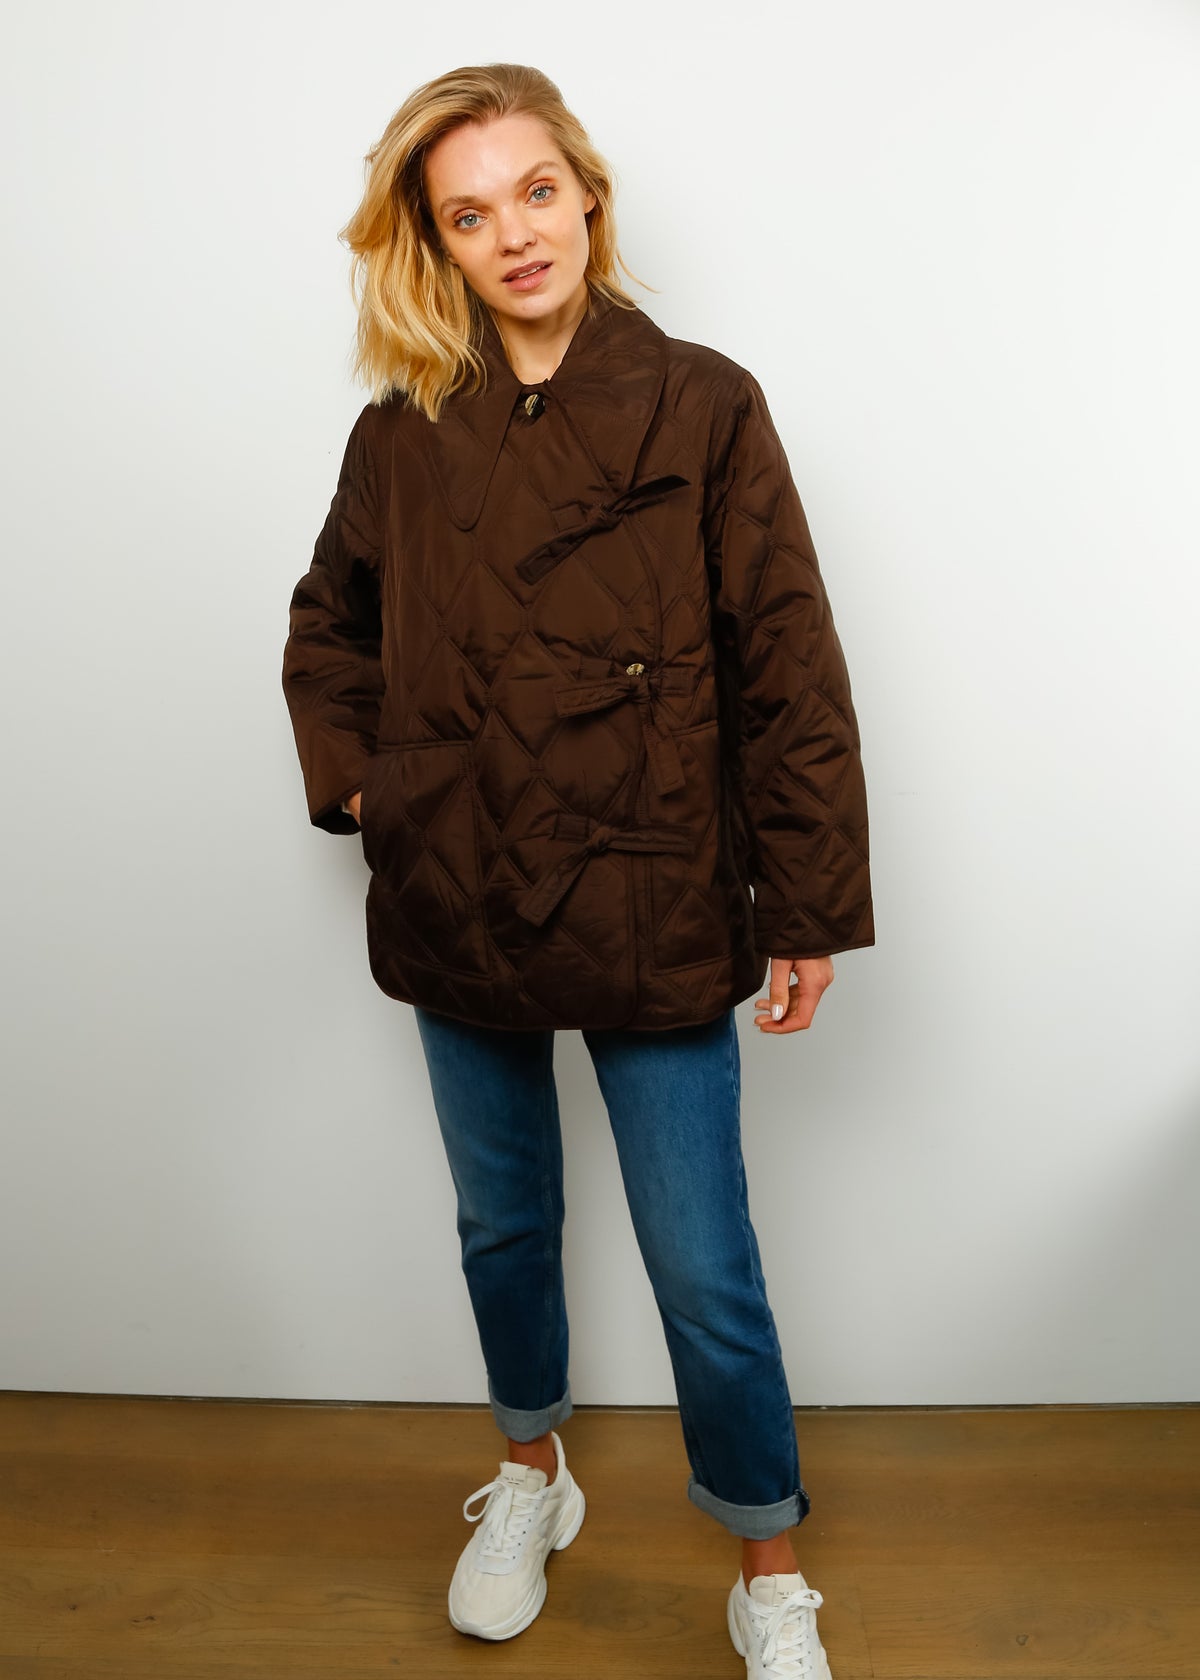 GANNI F7445 Ripstop Quilt Jacket in Mole